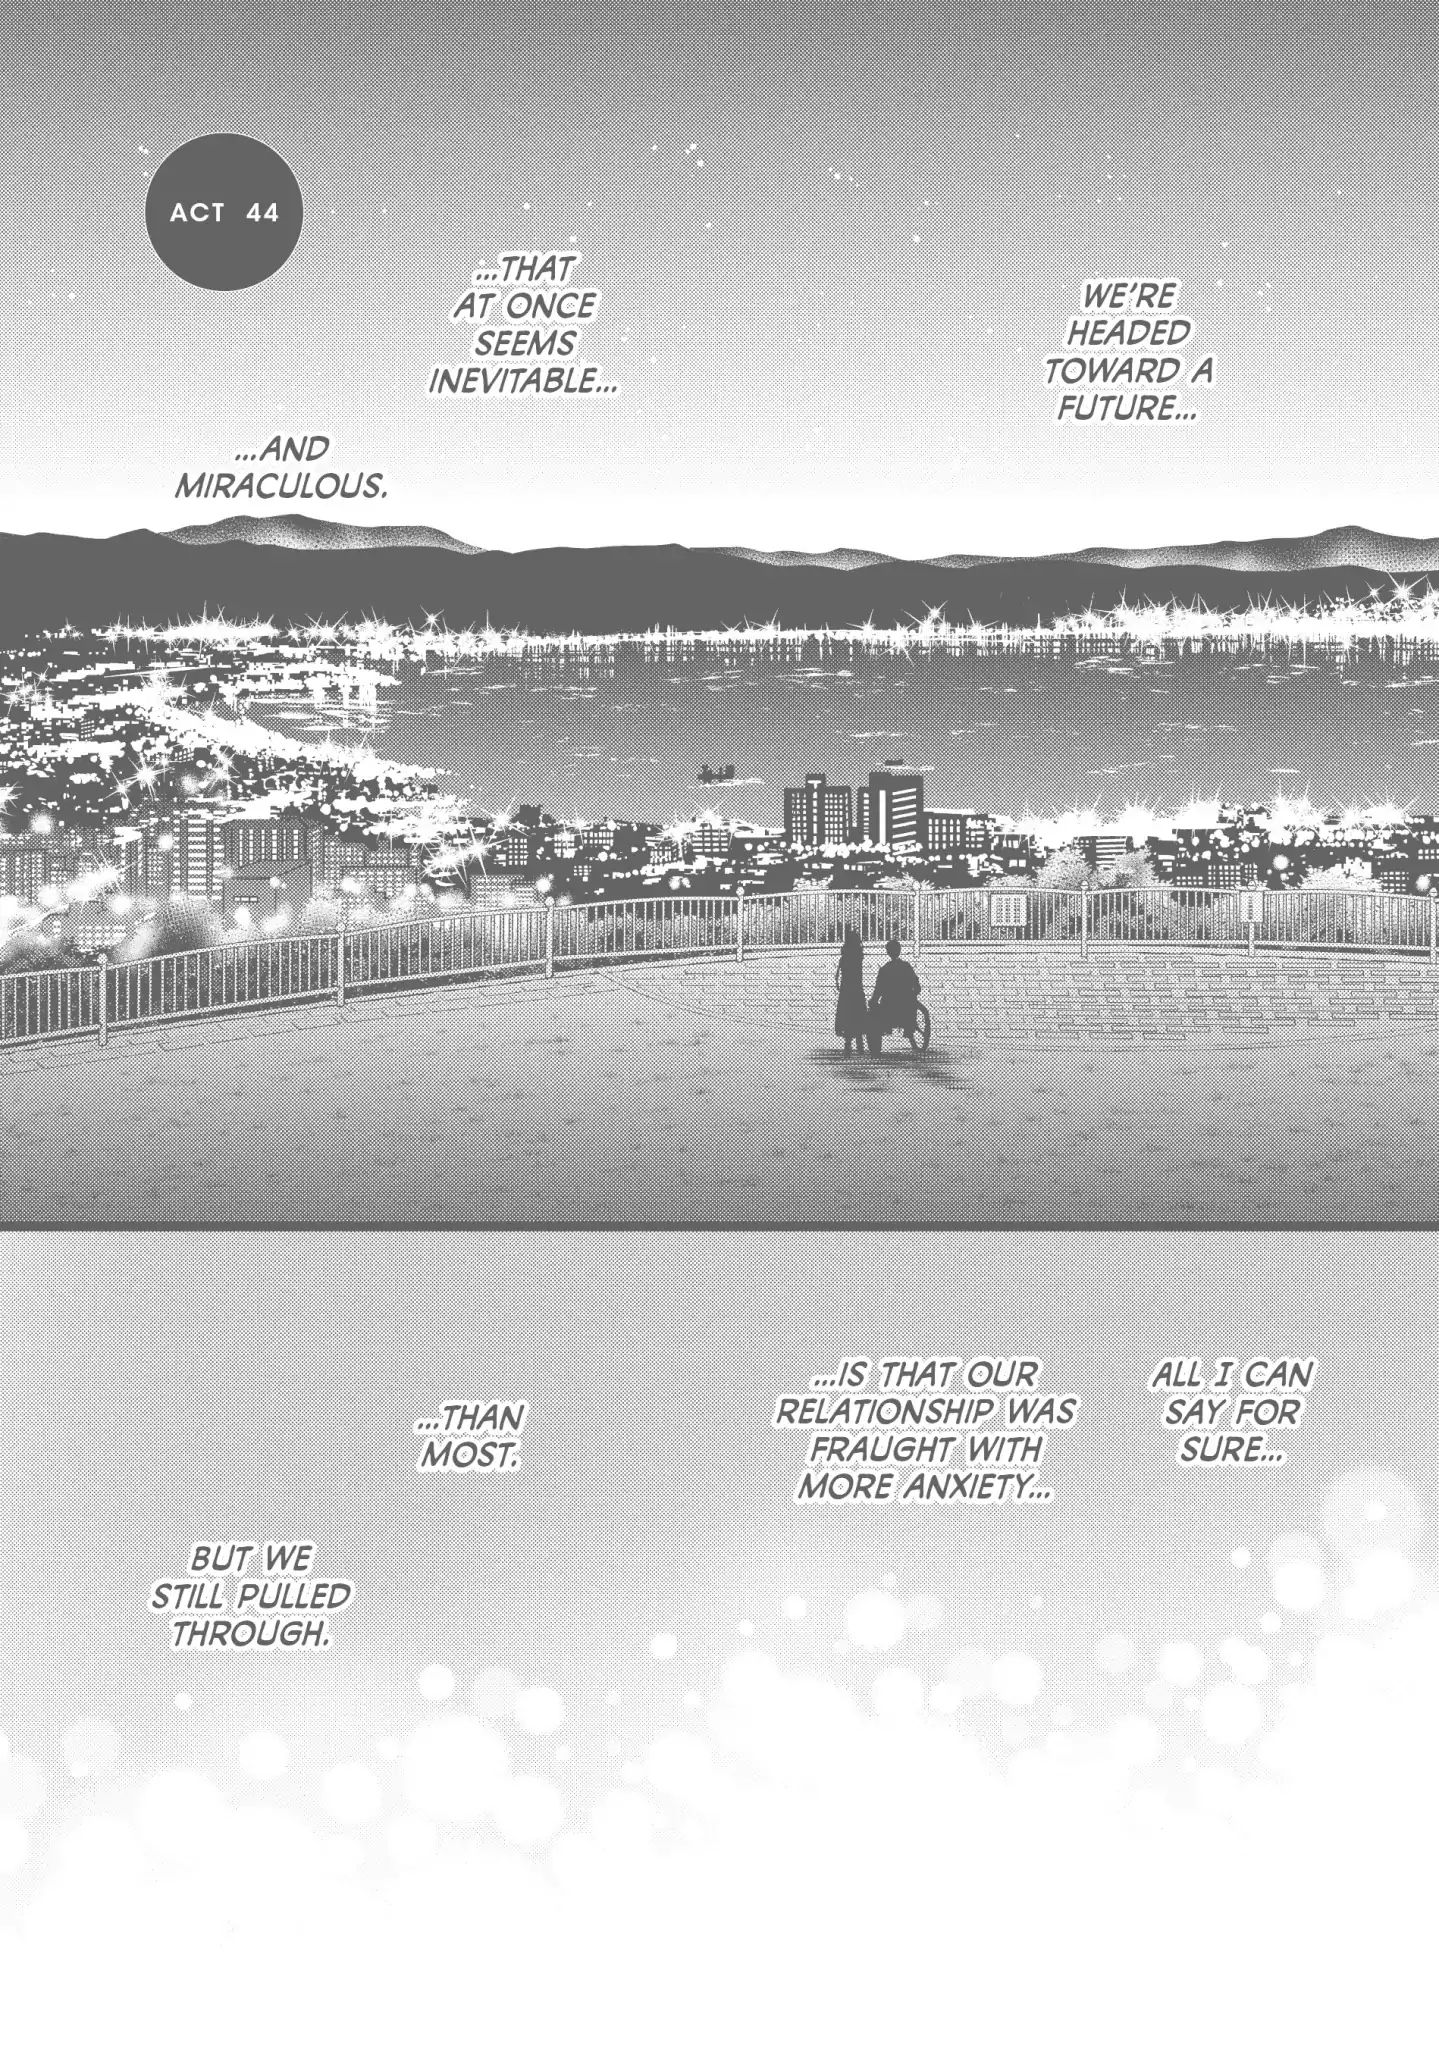 Perfect World (ARUGA Rie) Vol.9 Chapter 44: On A Sunny Day, Cherry Petals Dancing All Around